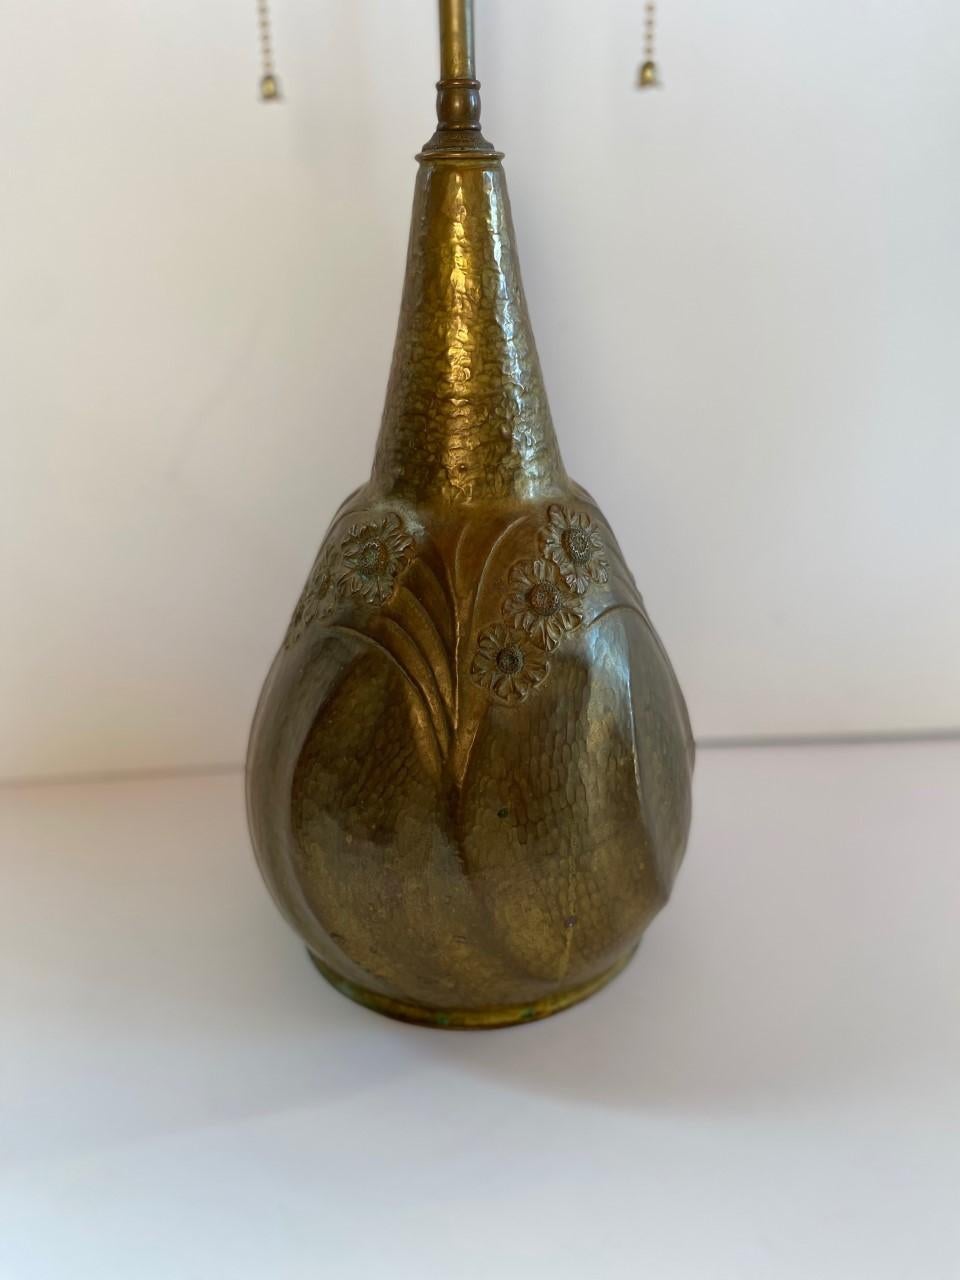 Belgian Art Nouveau hammered pewter gourd shape lamp by artist Leon Provins (Belgium, 1873-1943).
Signed L. Provins on lower half of lamp structure. Stamped on bottom, Made in Belgium.
The craftsmanship portrayed in this museum quality piece,